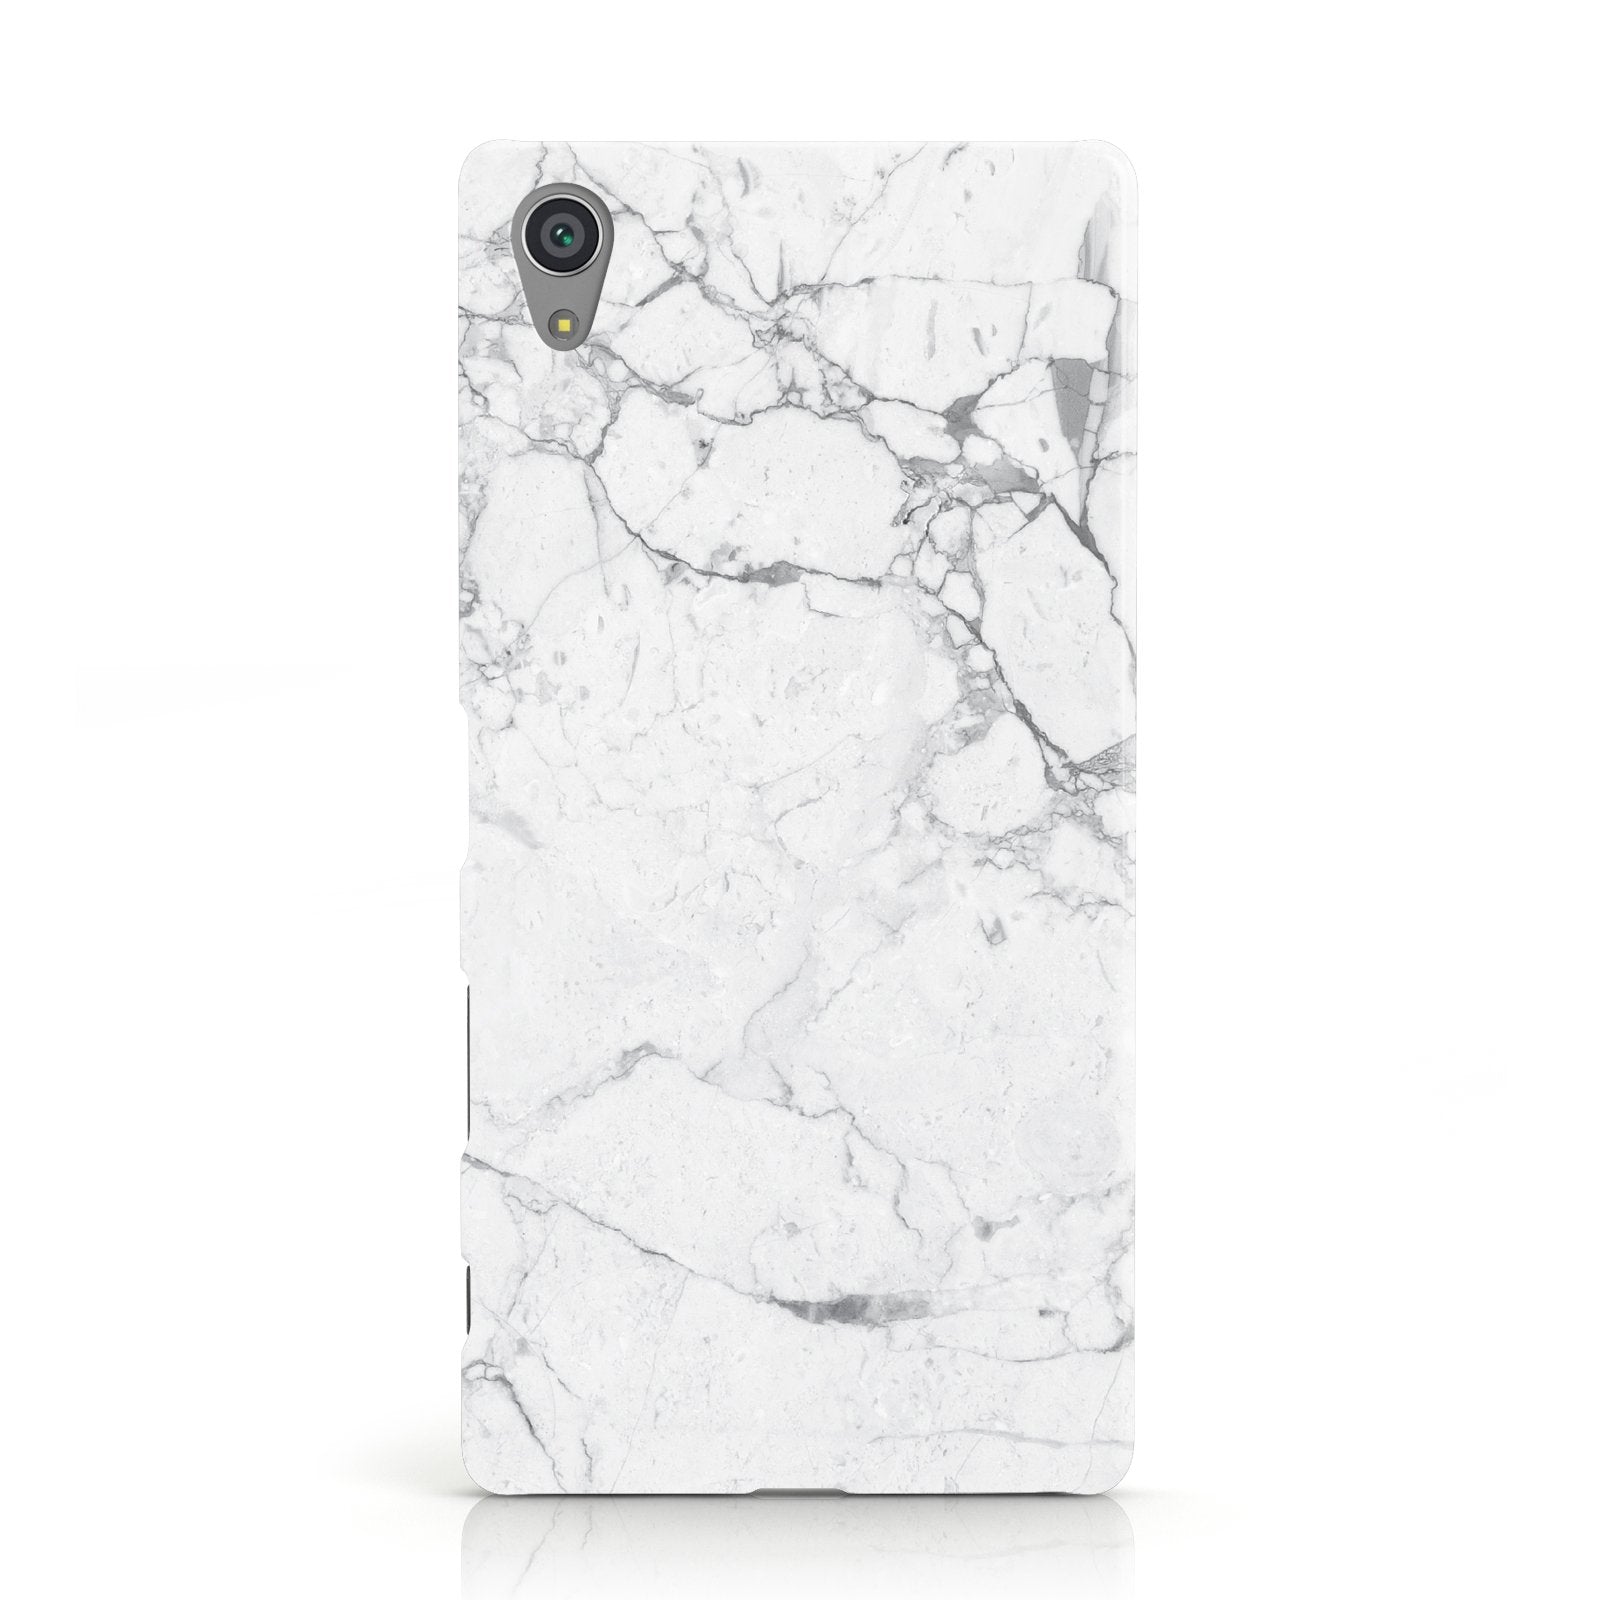 Faux Marble Effect Grey White Sony Xperia Case